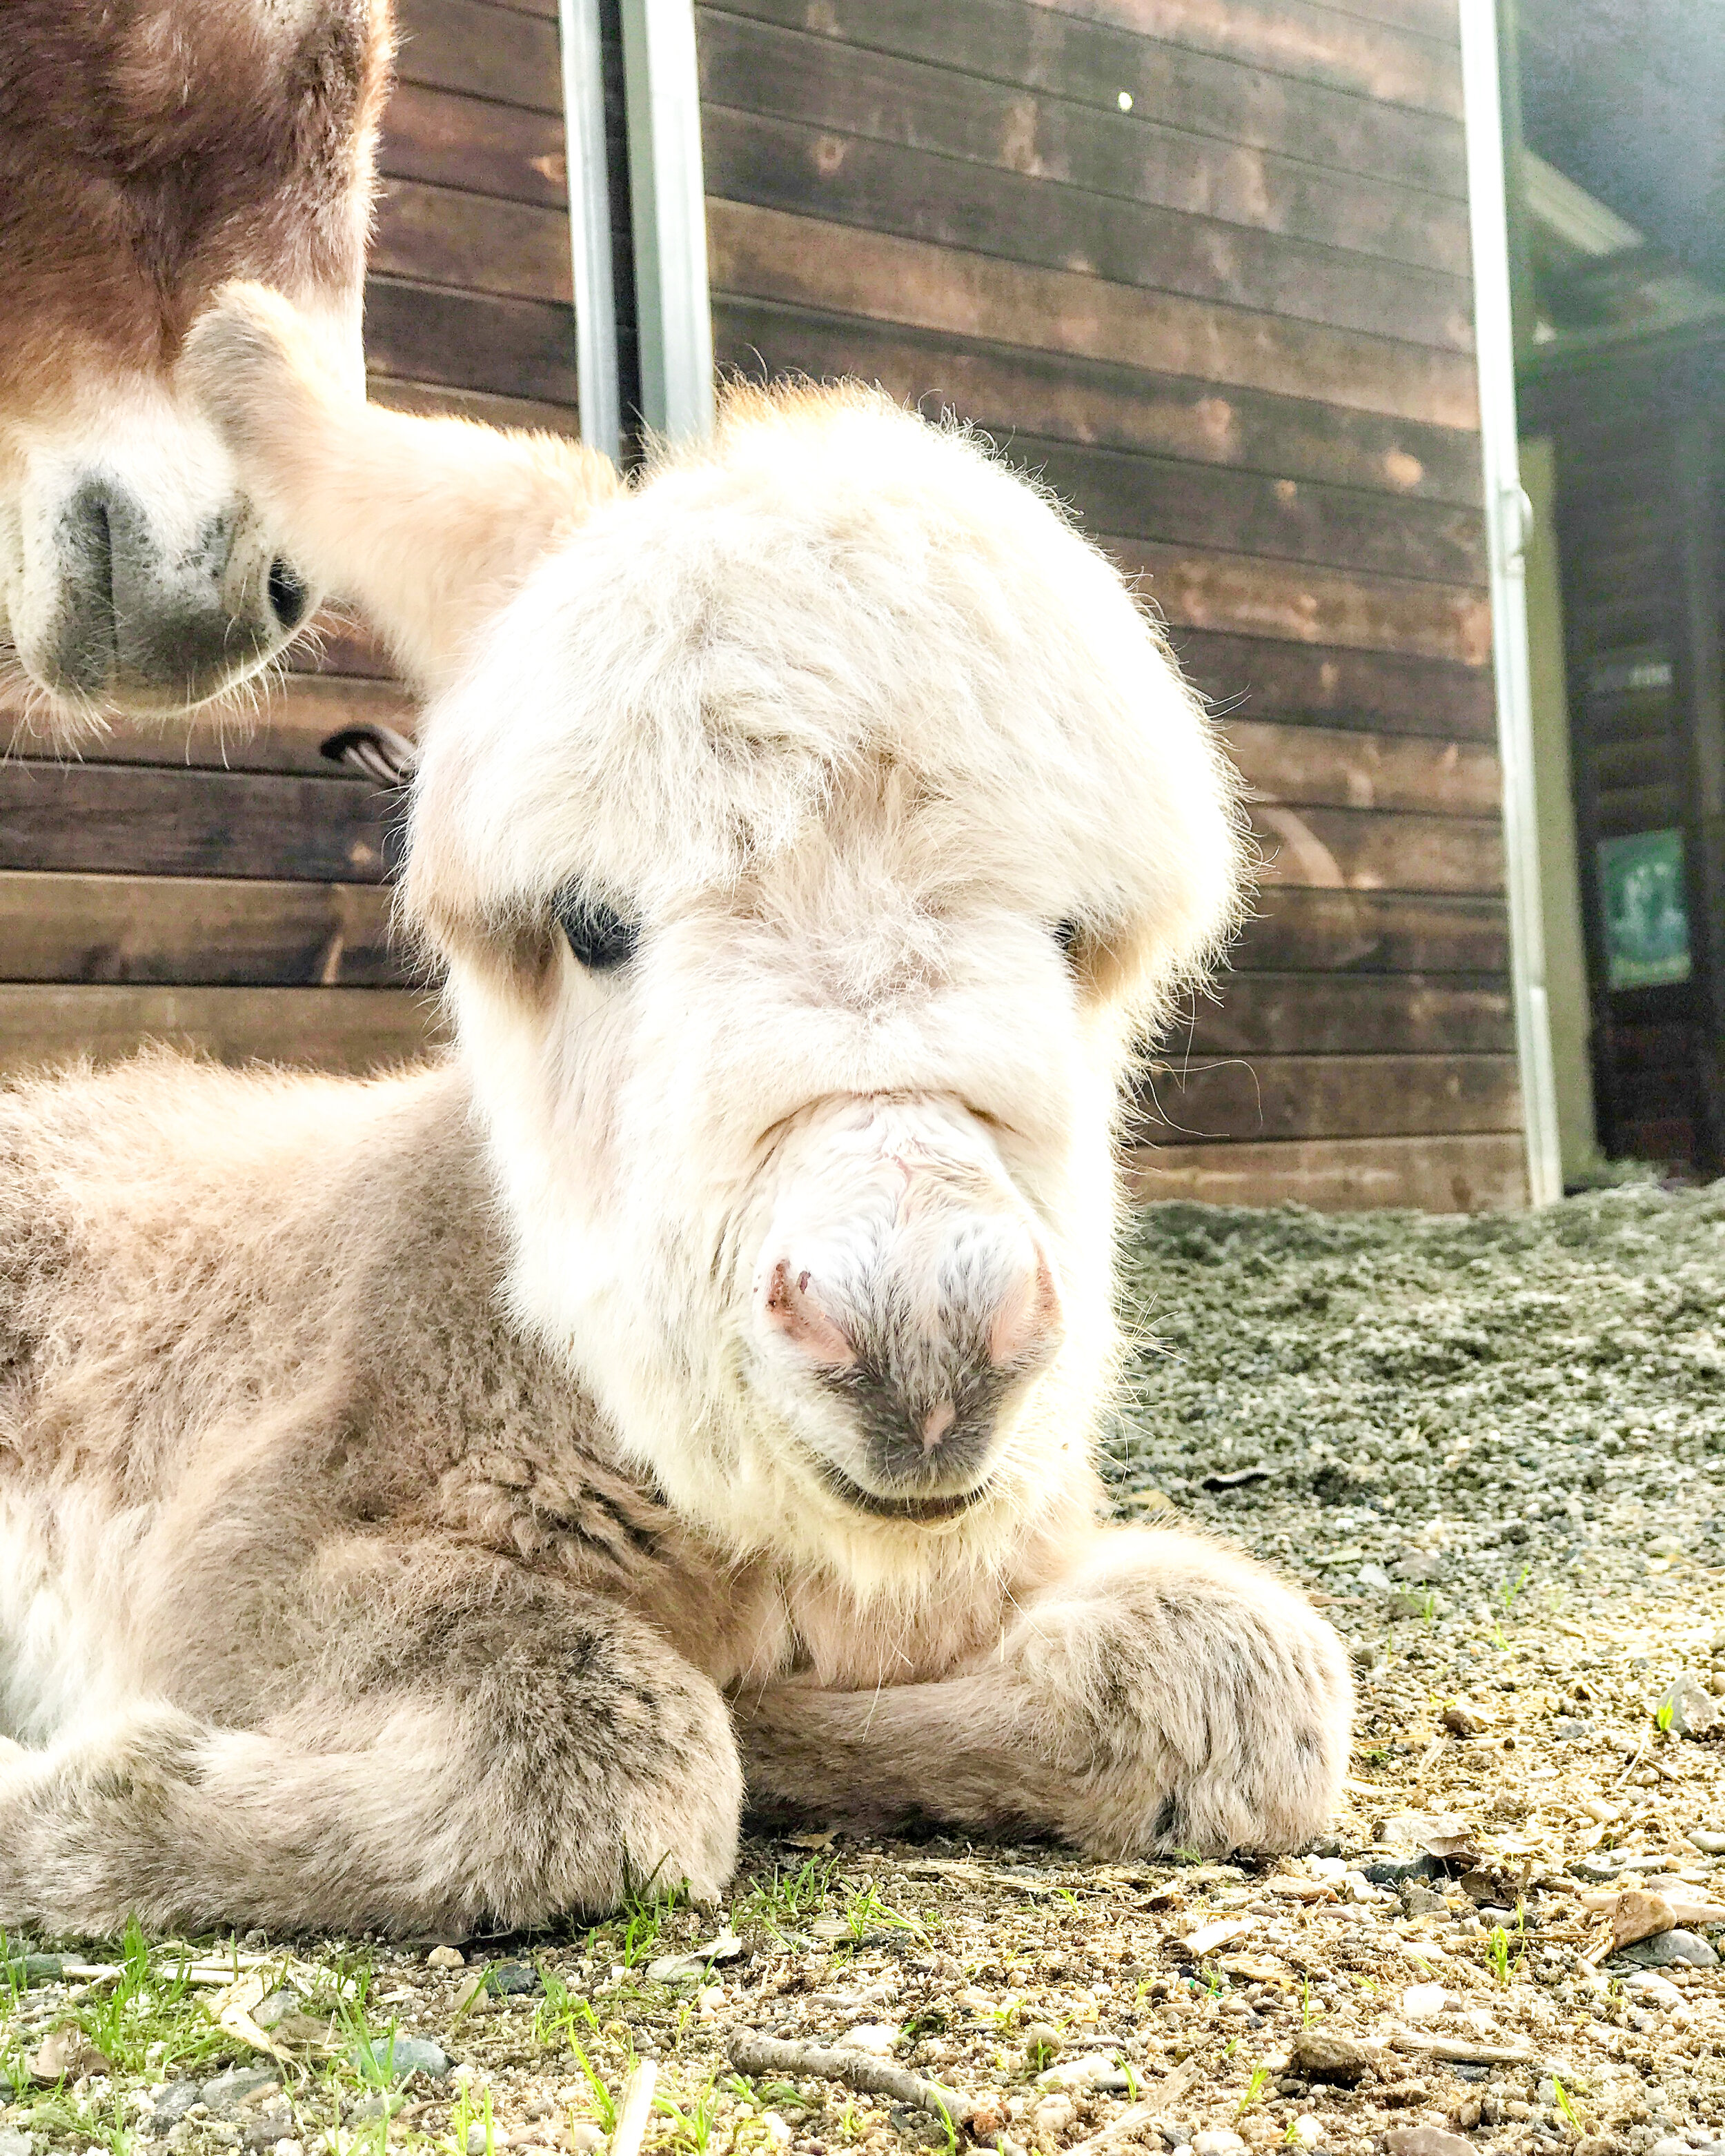 If you're thinking about getting a miniature donkey, read all about them in this post including the 5 best reasons to own a mini donkey!